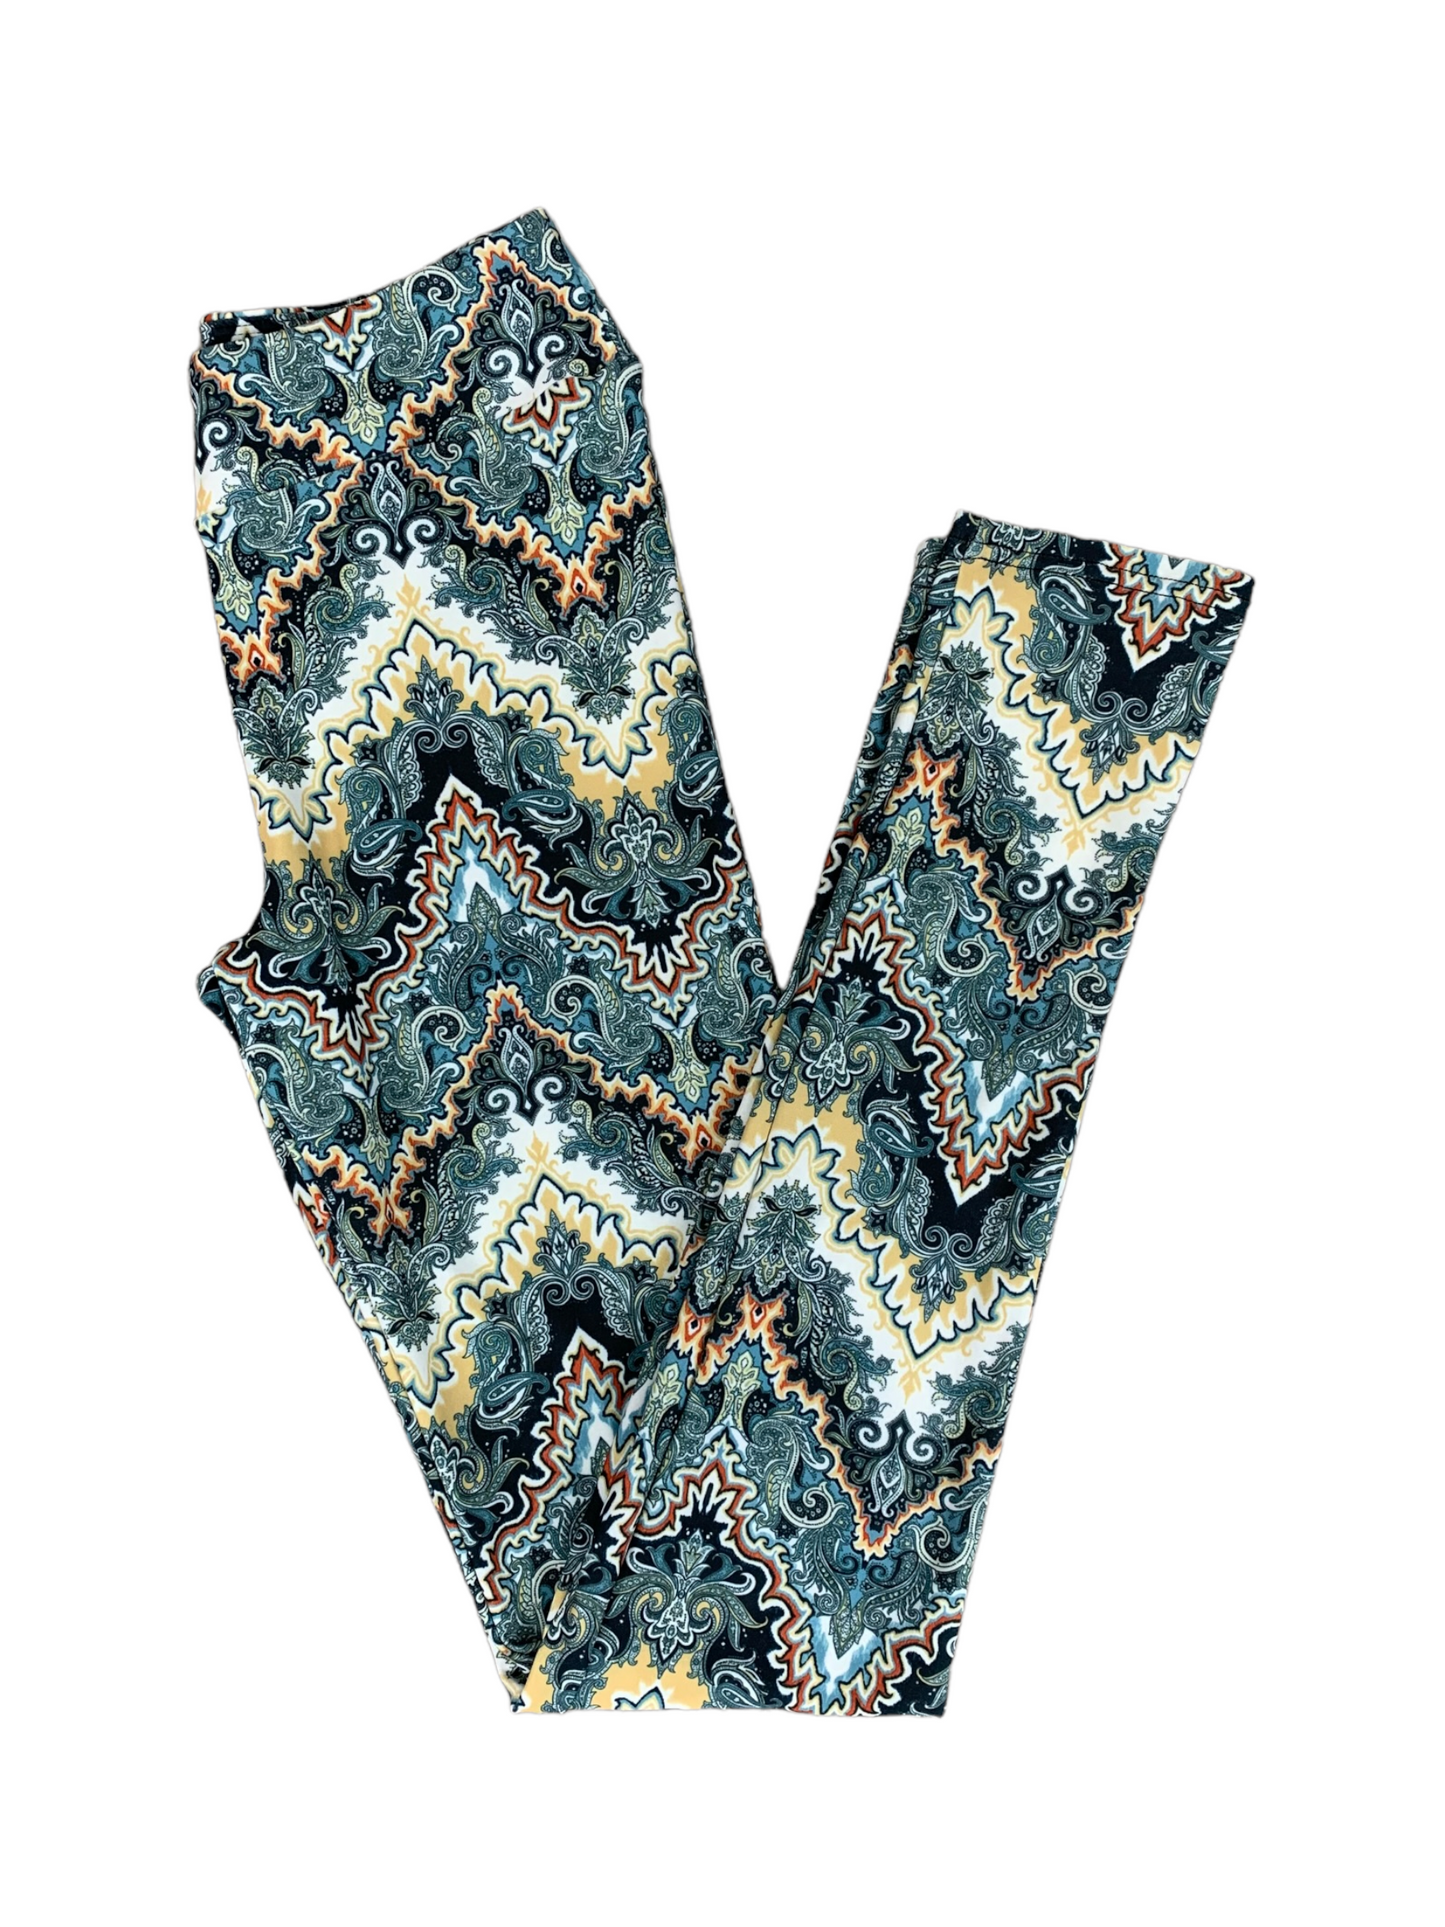 Women's Leggings with zigzag patterns